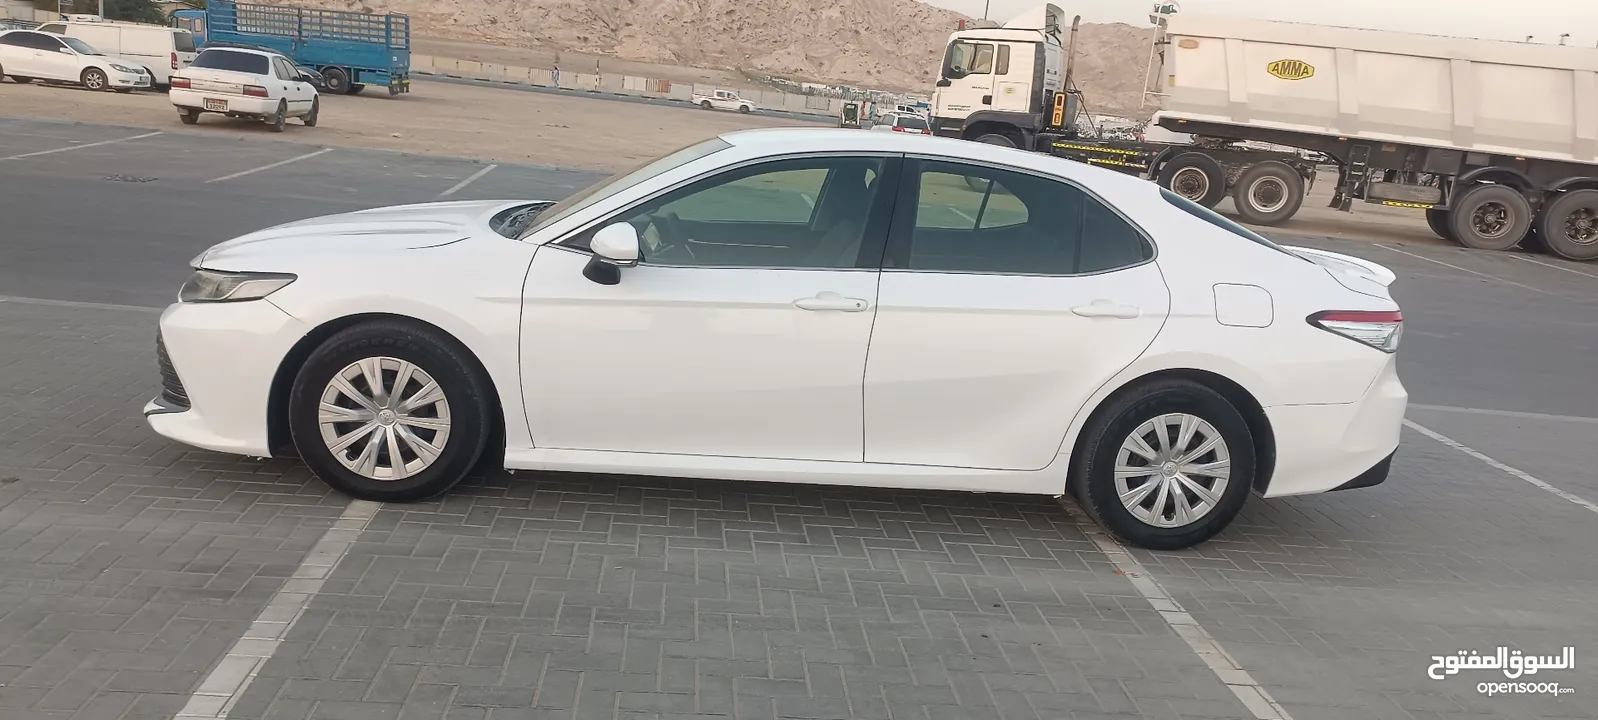 Toyota Camry model 2019 for sale